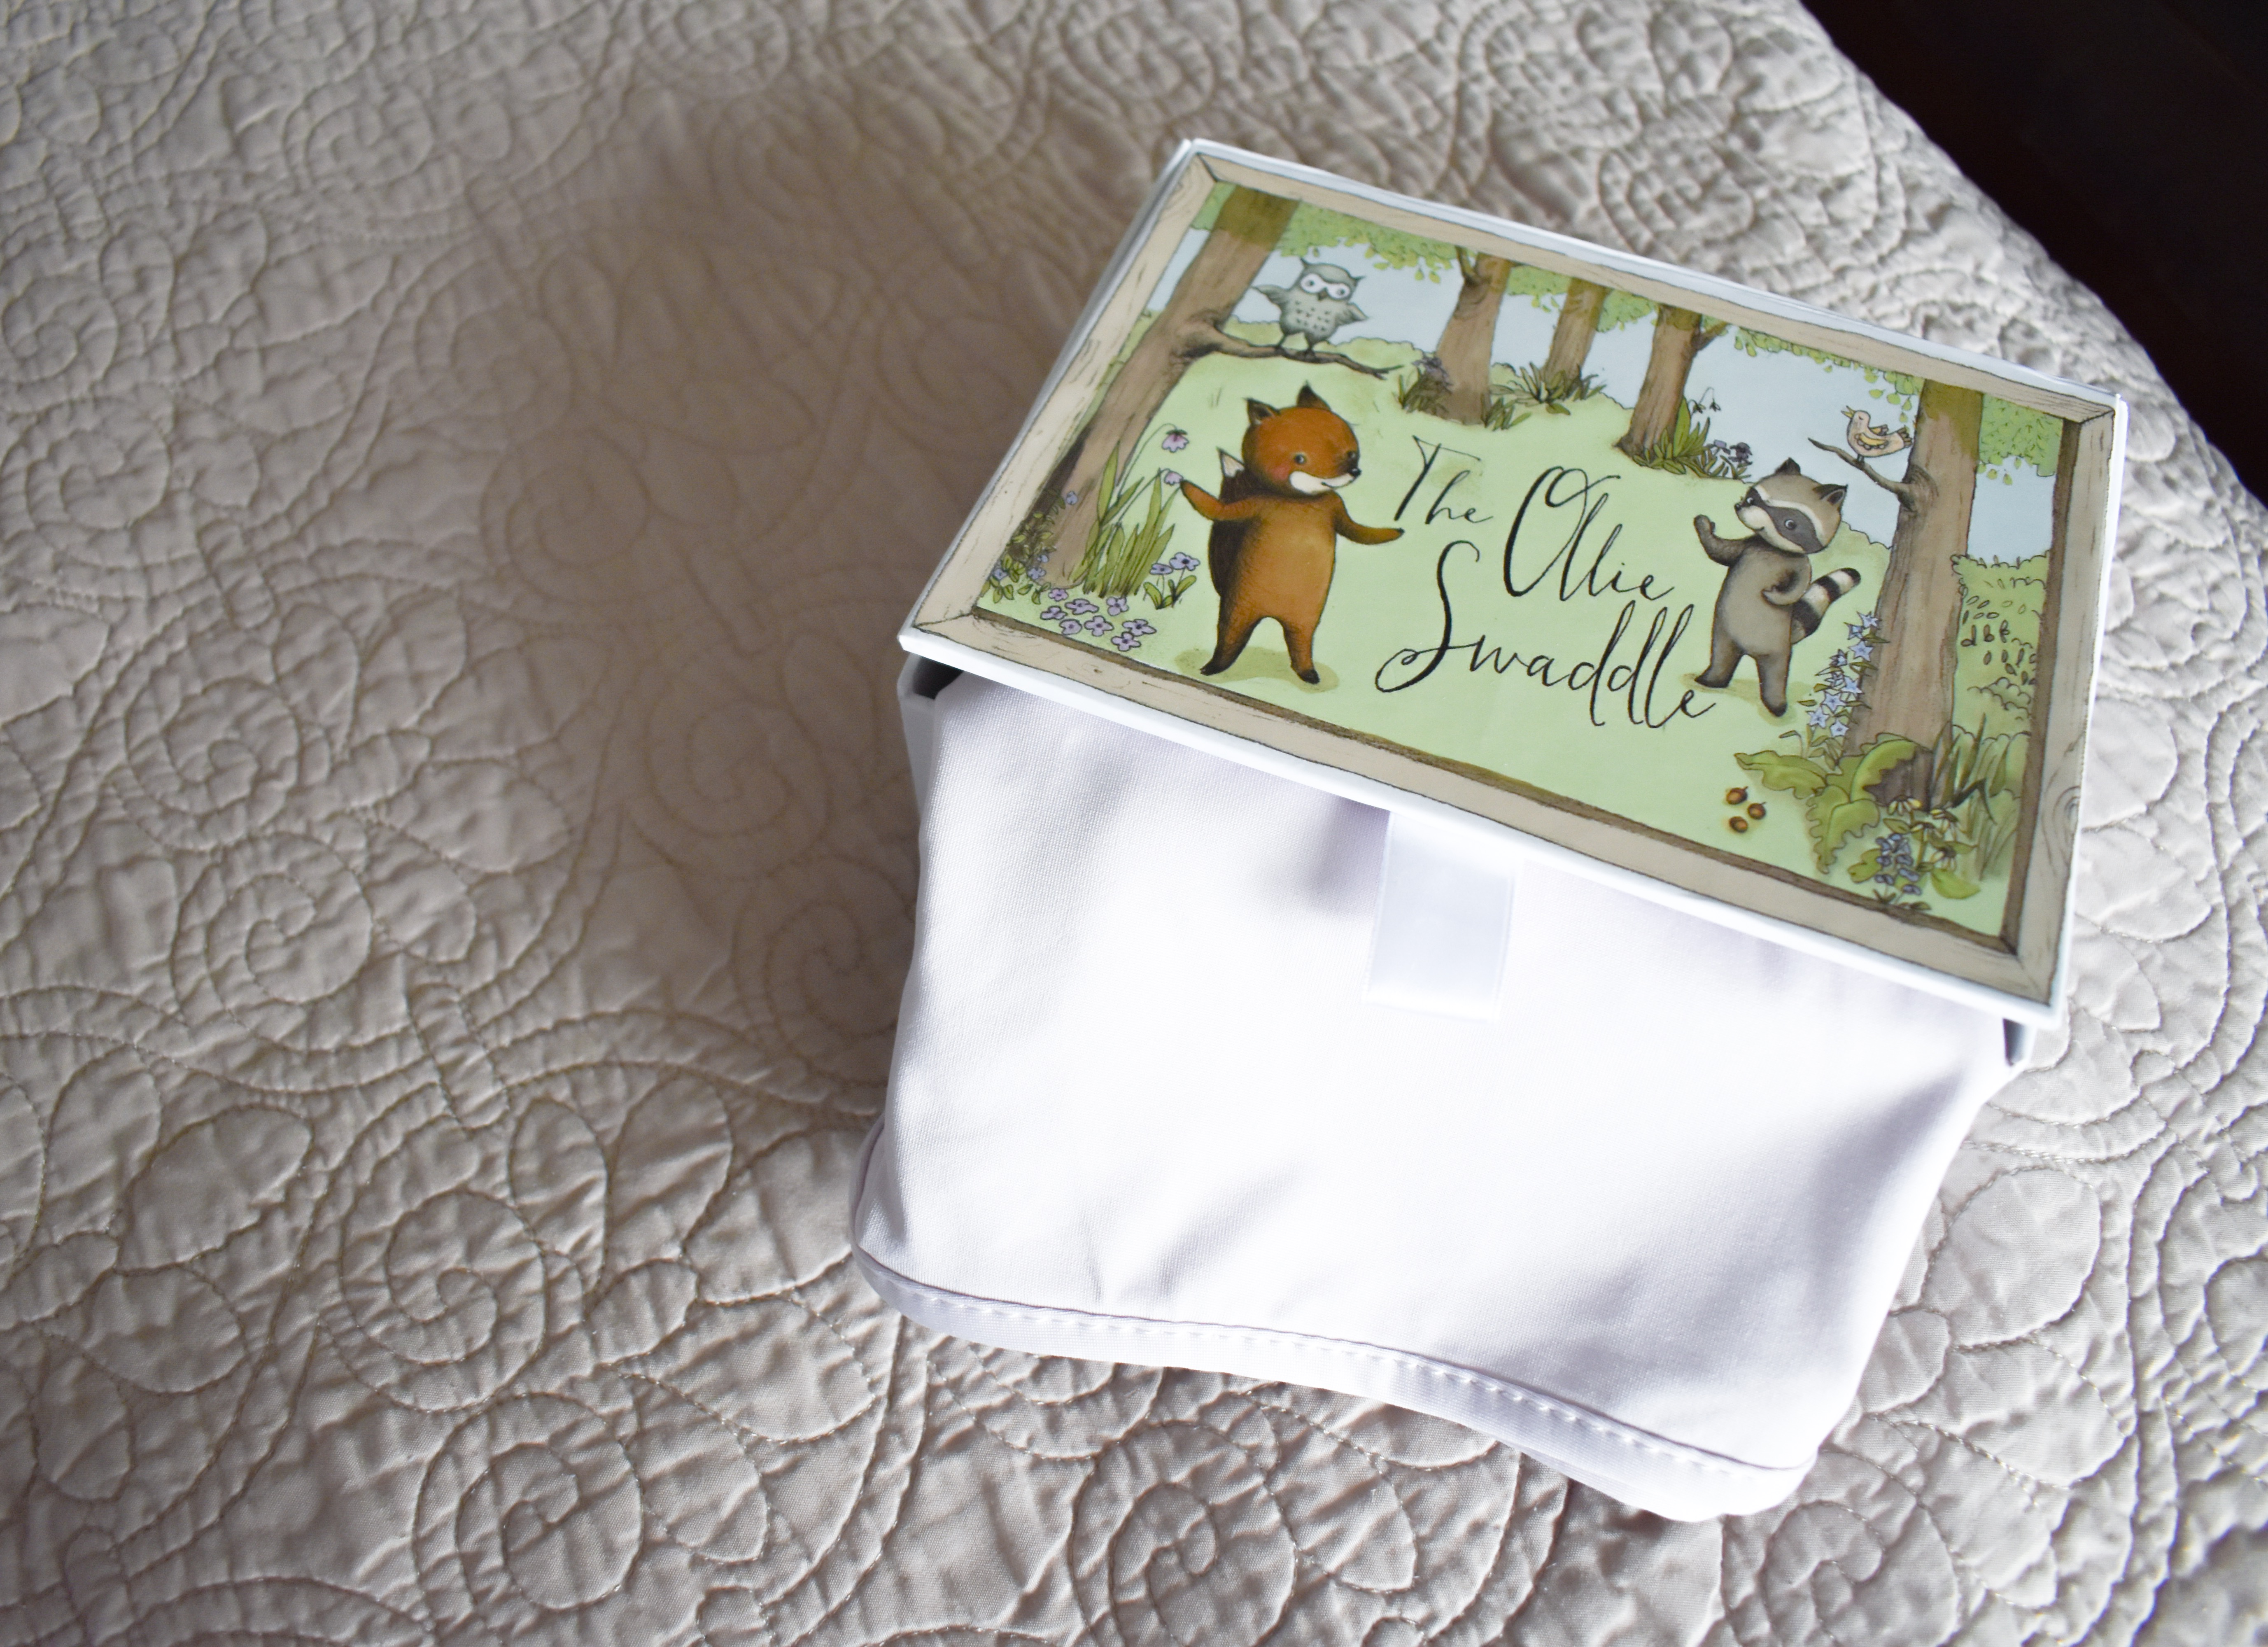 The Ollie Swaddle Review